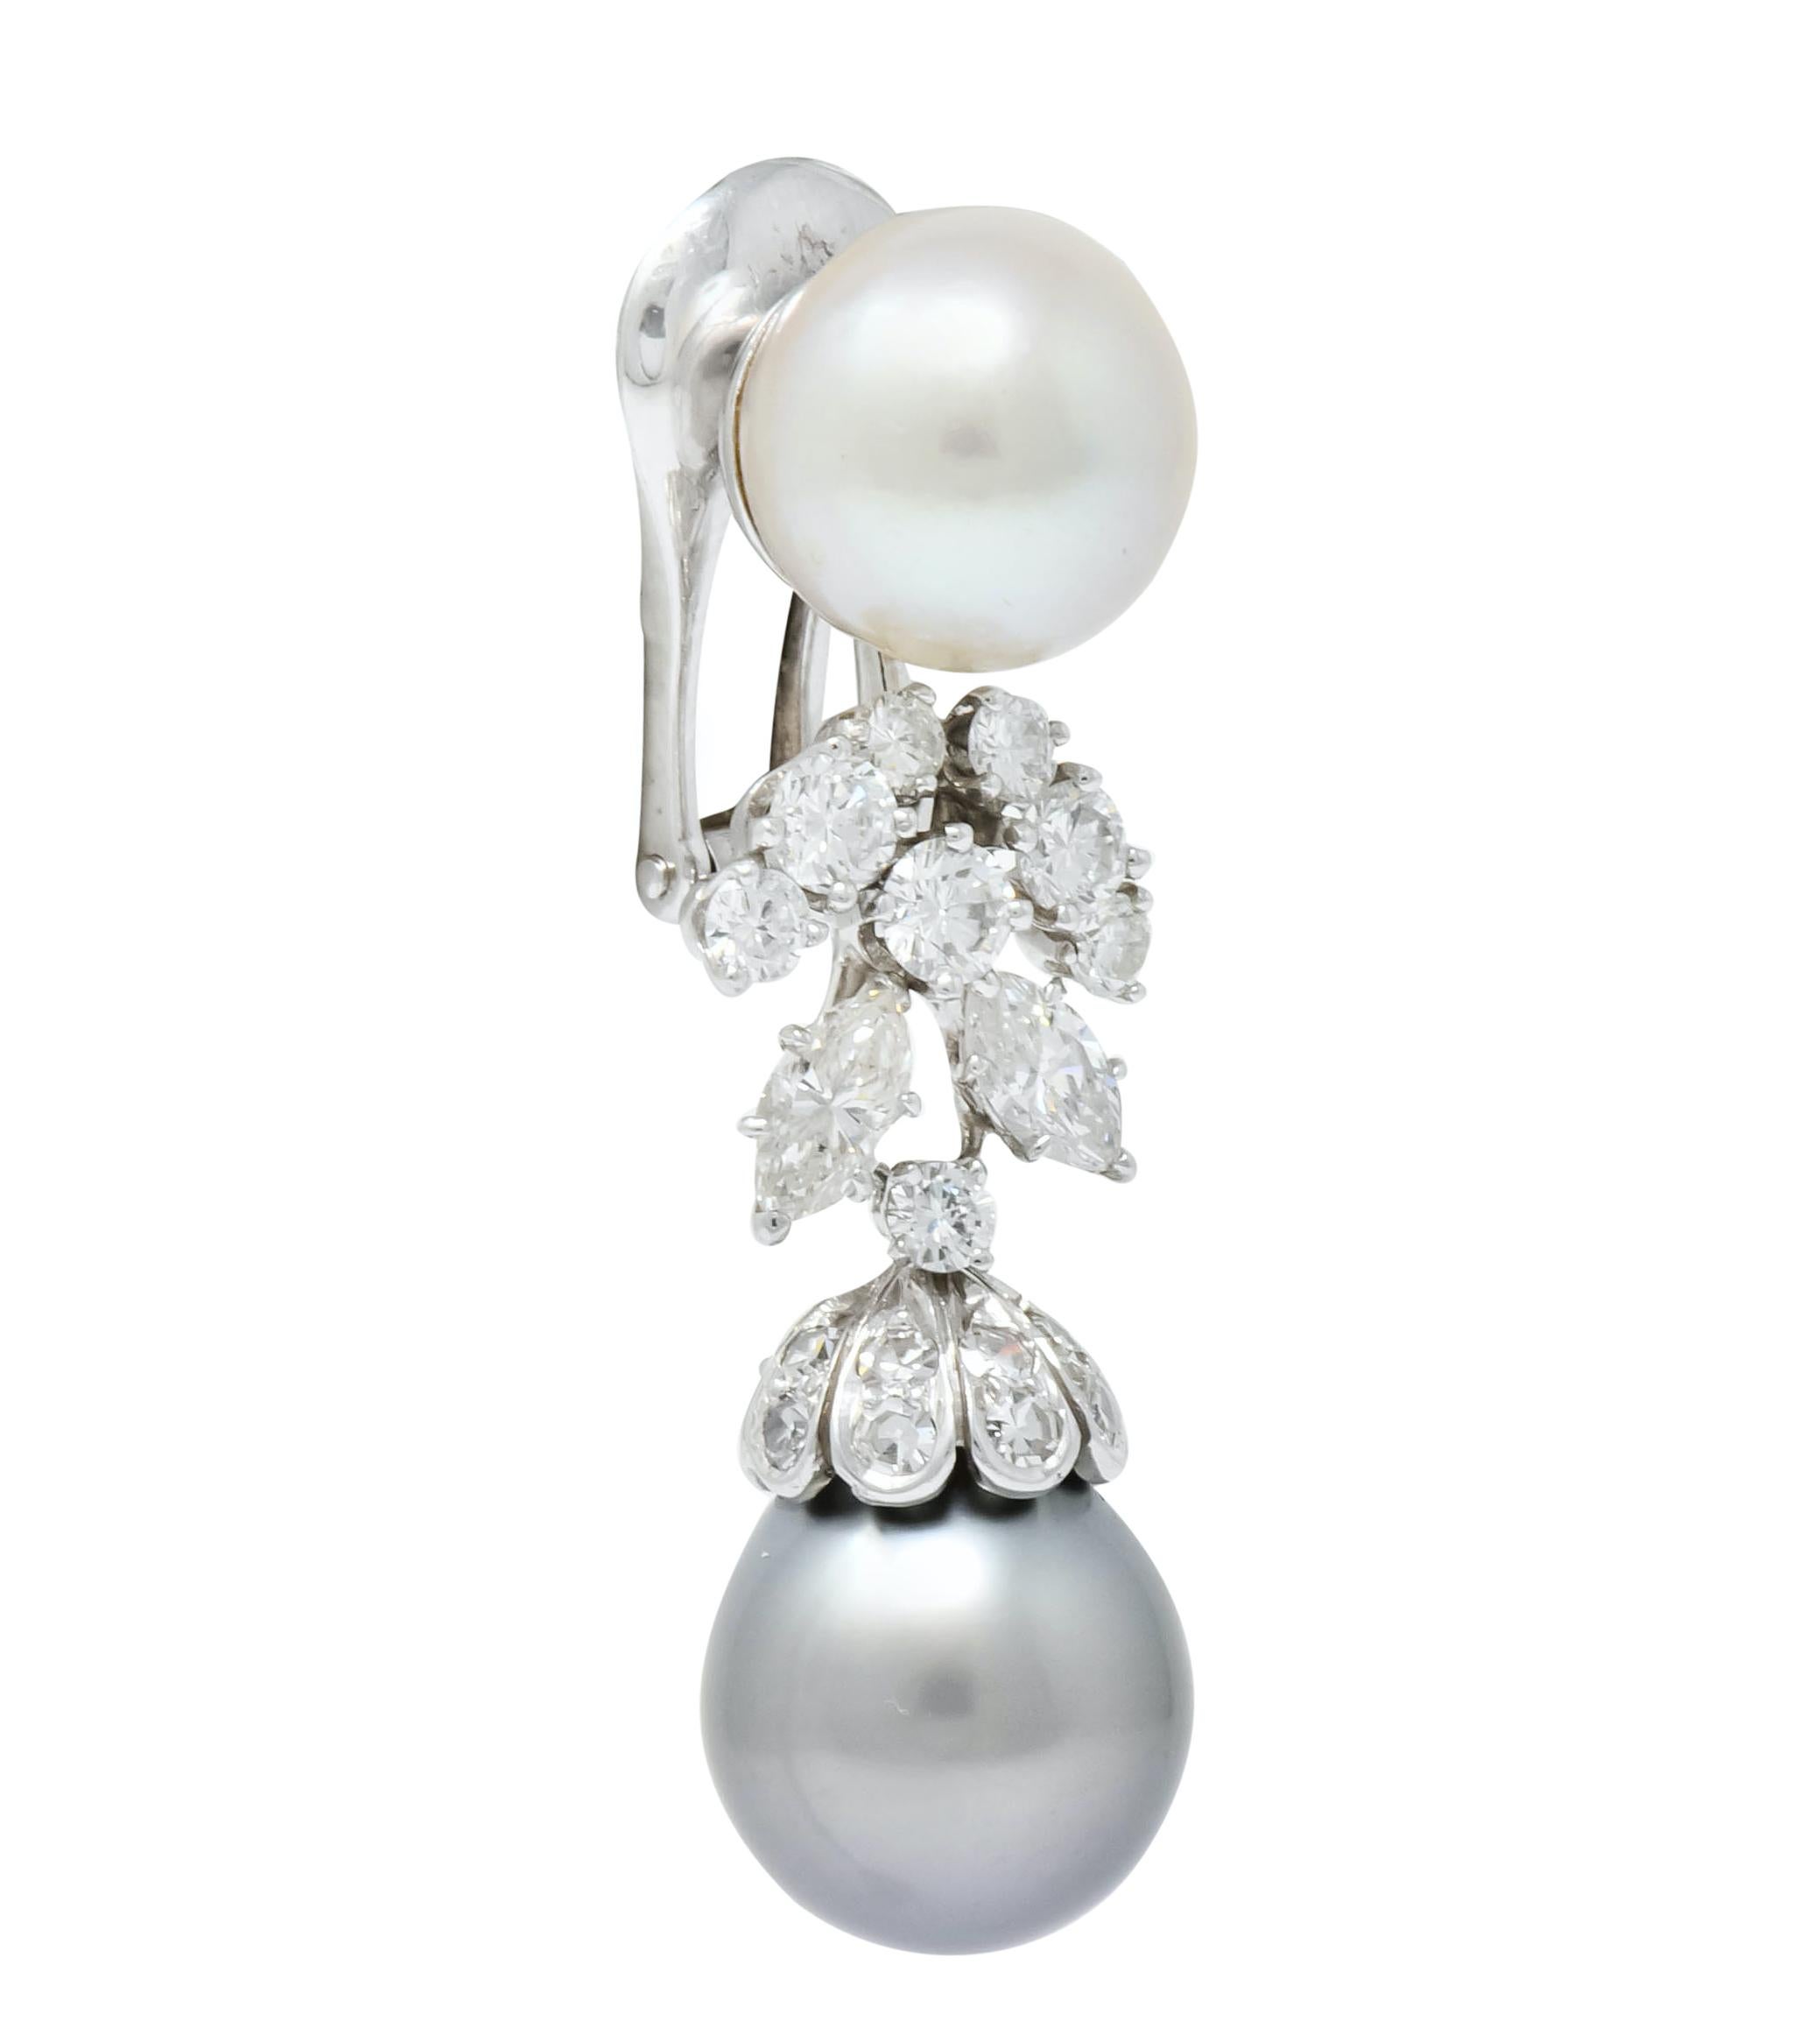 Centering a round cultured pearl surmount measuring approximately 10.3 mm, cream in body color with rosé overtones and excellent luster

With articulated drop featuring foliate motif and scalloped pearl cap set throughout with round brilliant cut,